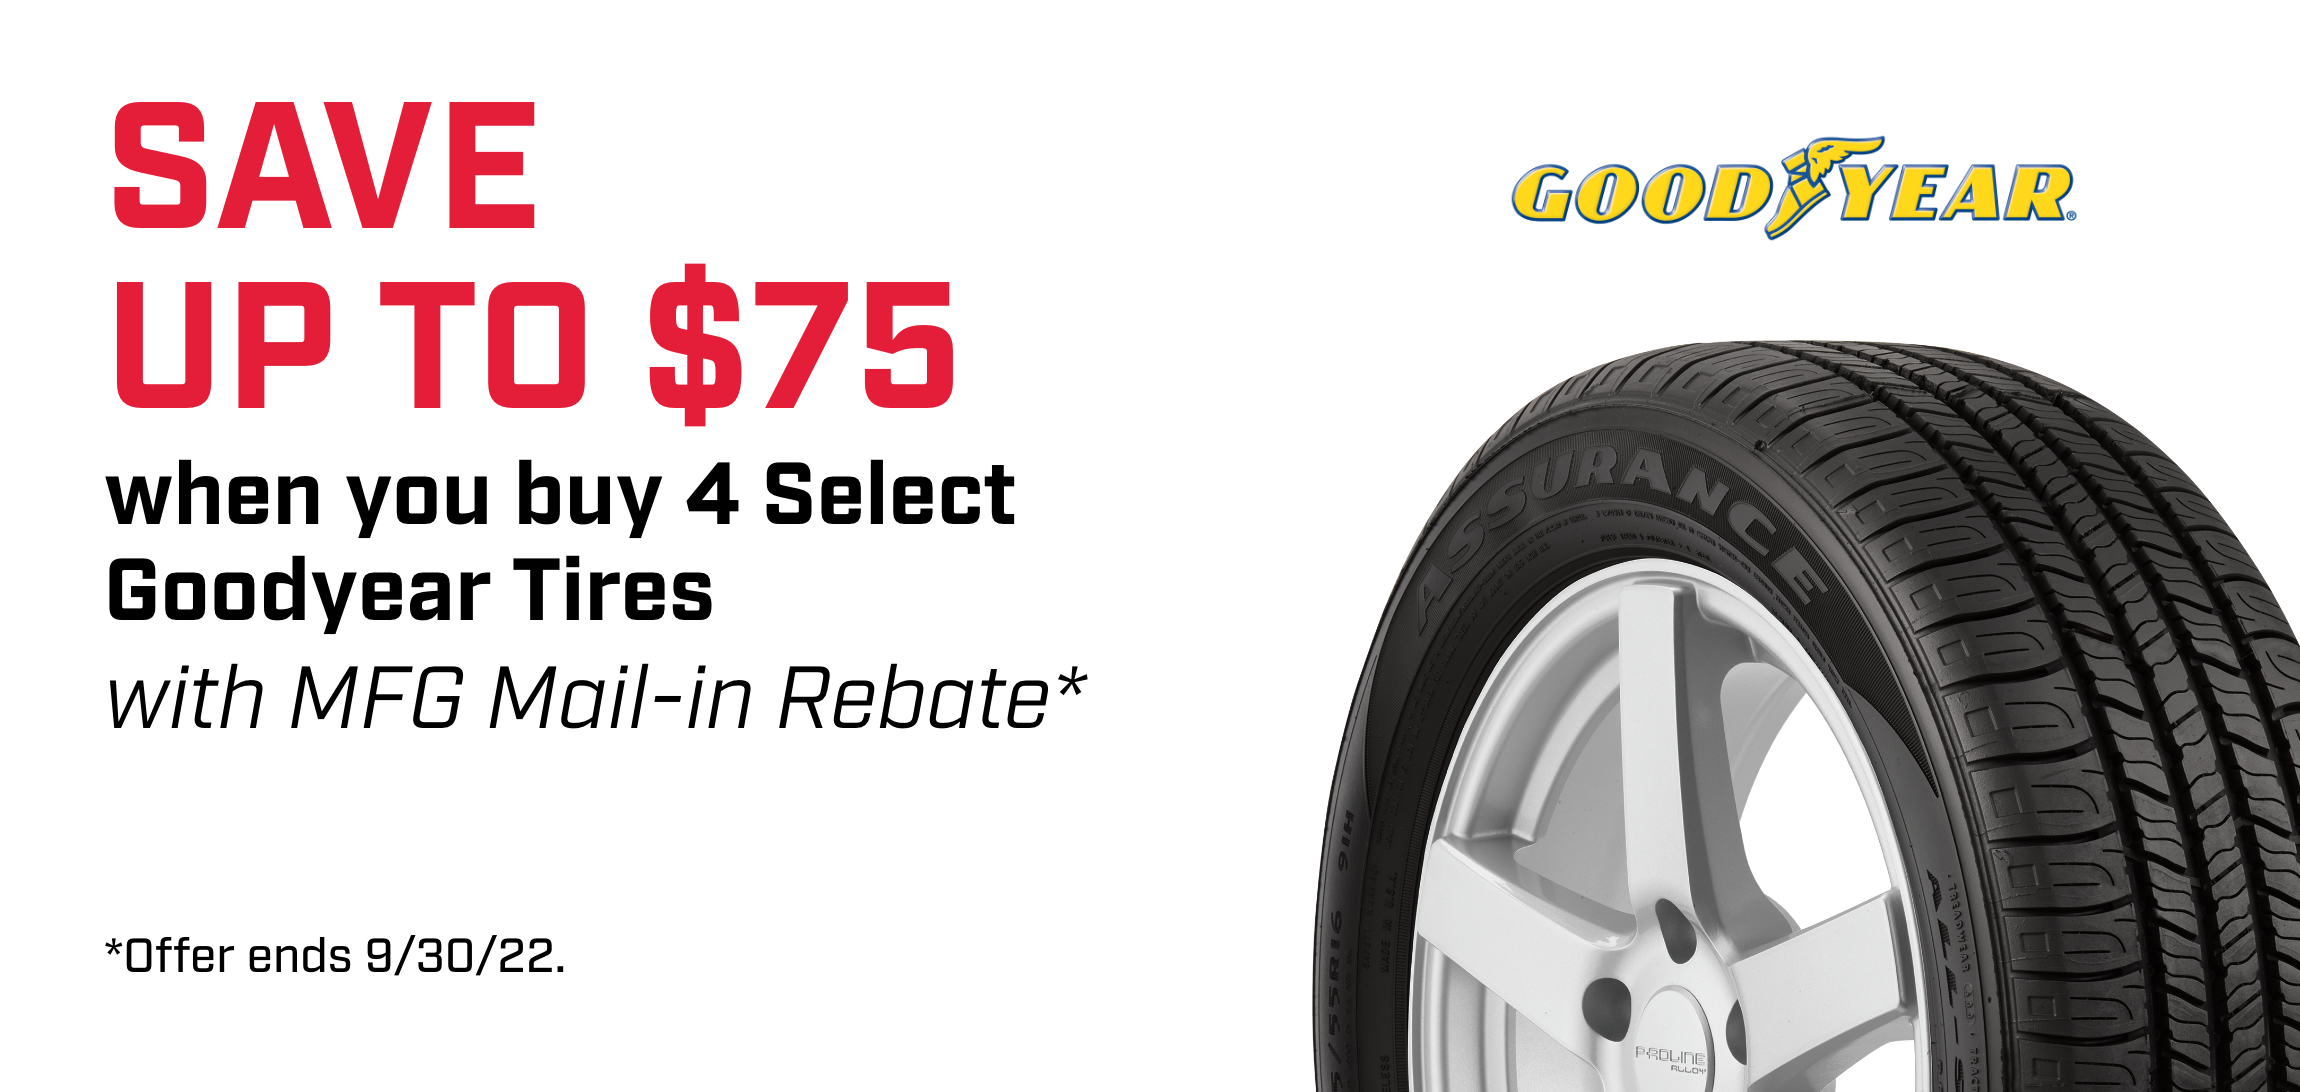 Save $75 on Goodyear Tires